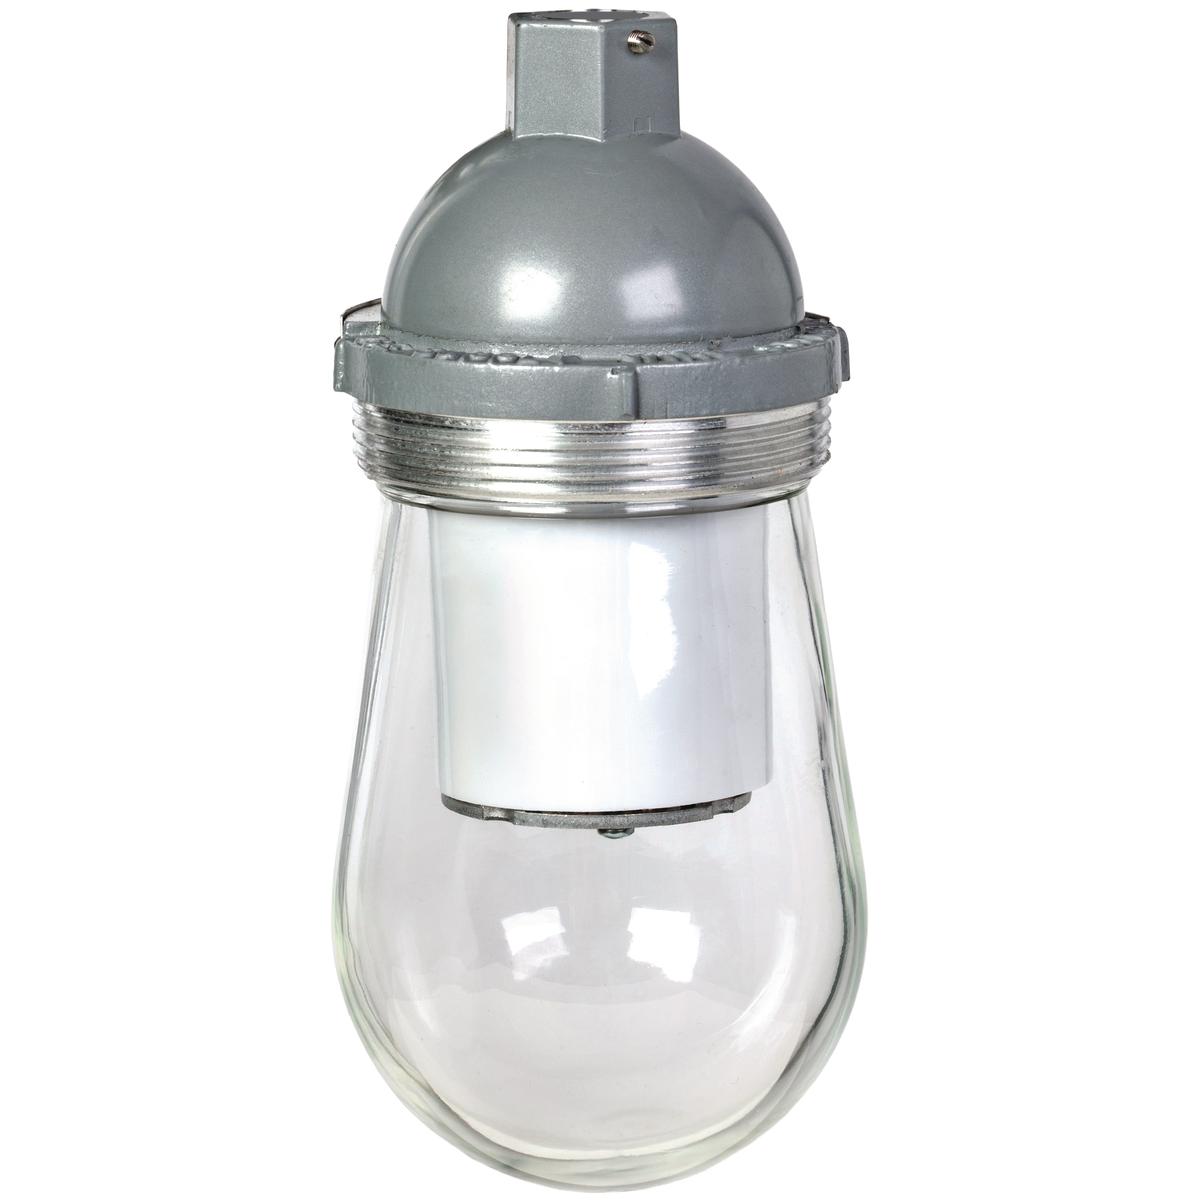 Hubbell DVL1630A1G DV LED 16W Fluorescent 120-277VAC 1/2" Pendant Guard  ; Compact in Size with Traditional Industrial Appearance and Suitability ; DVL LED Housings can be retrofitted to existing DV Series splice boxes to upgrade from incandescent housing 100 Series compone